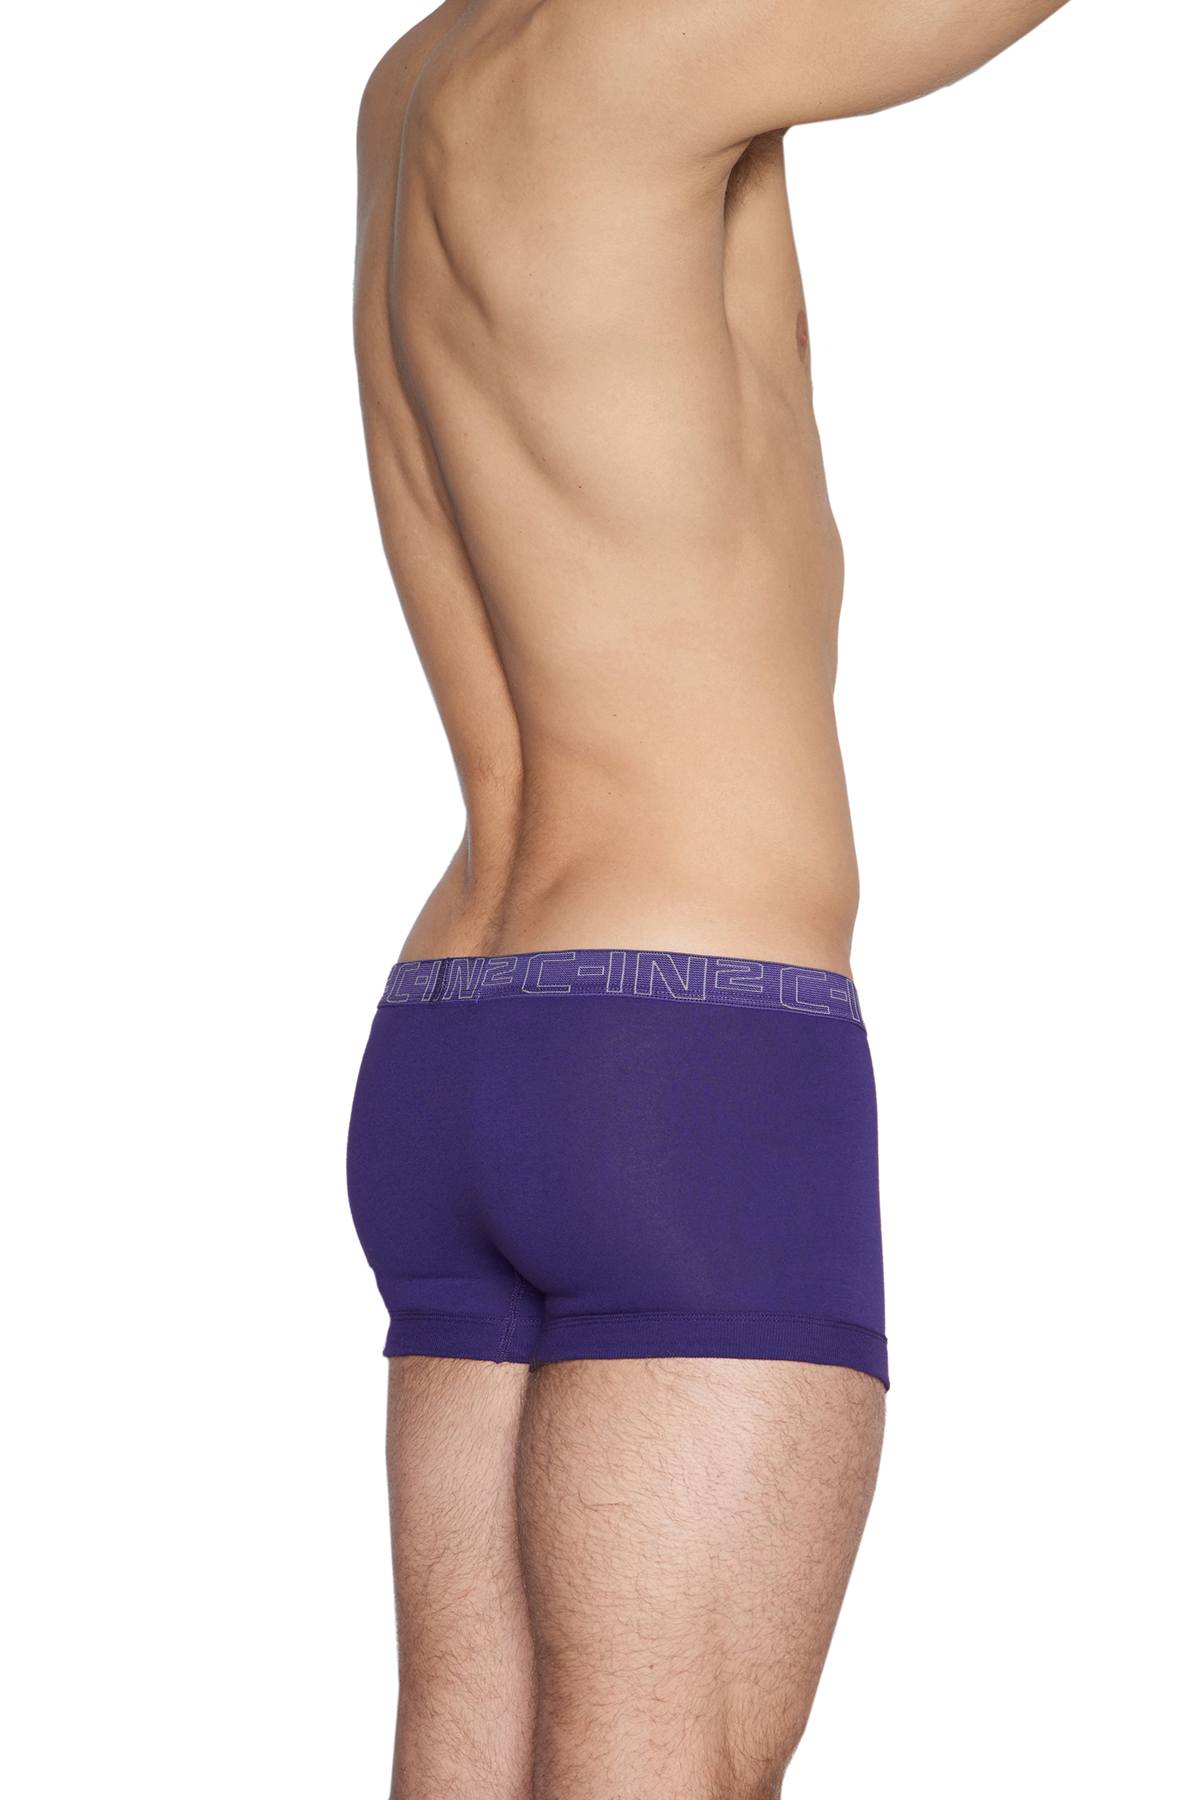 C-IN2 Tanager-Teal/Purple-Label Trunk 2-Pack